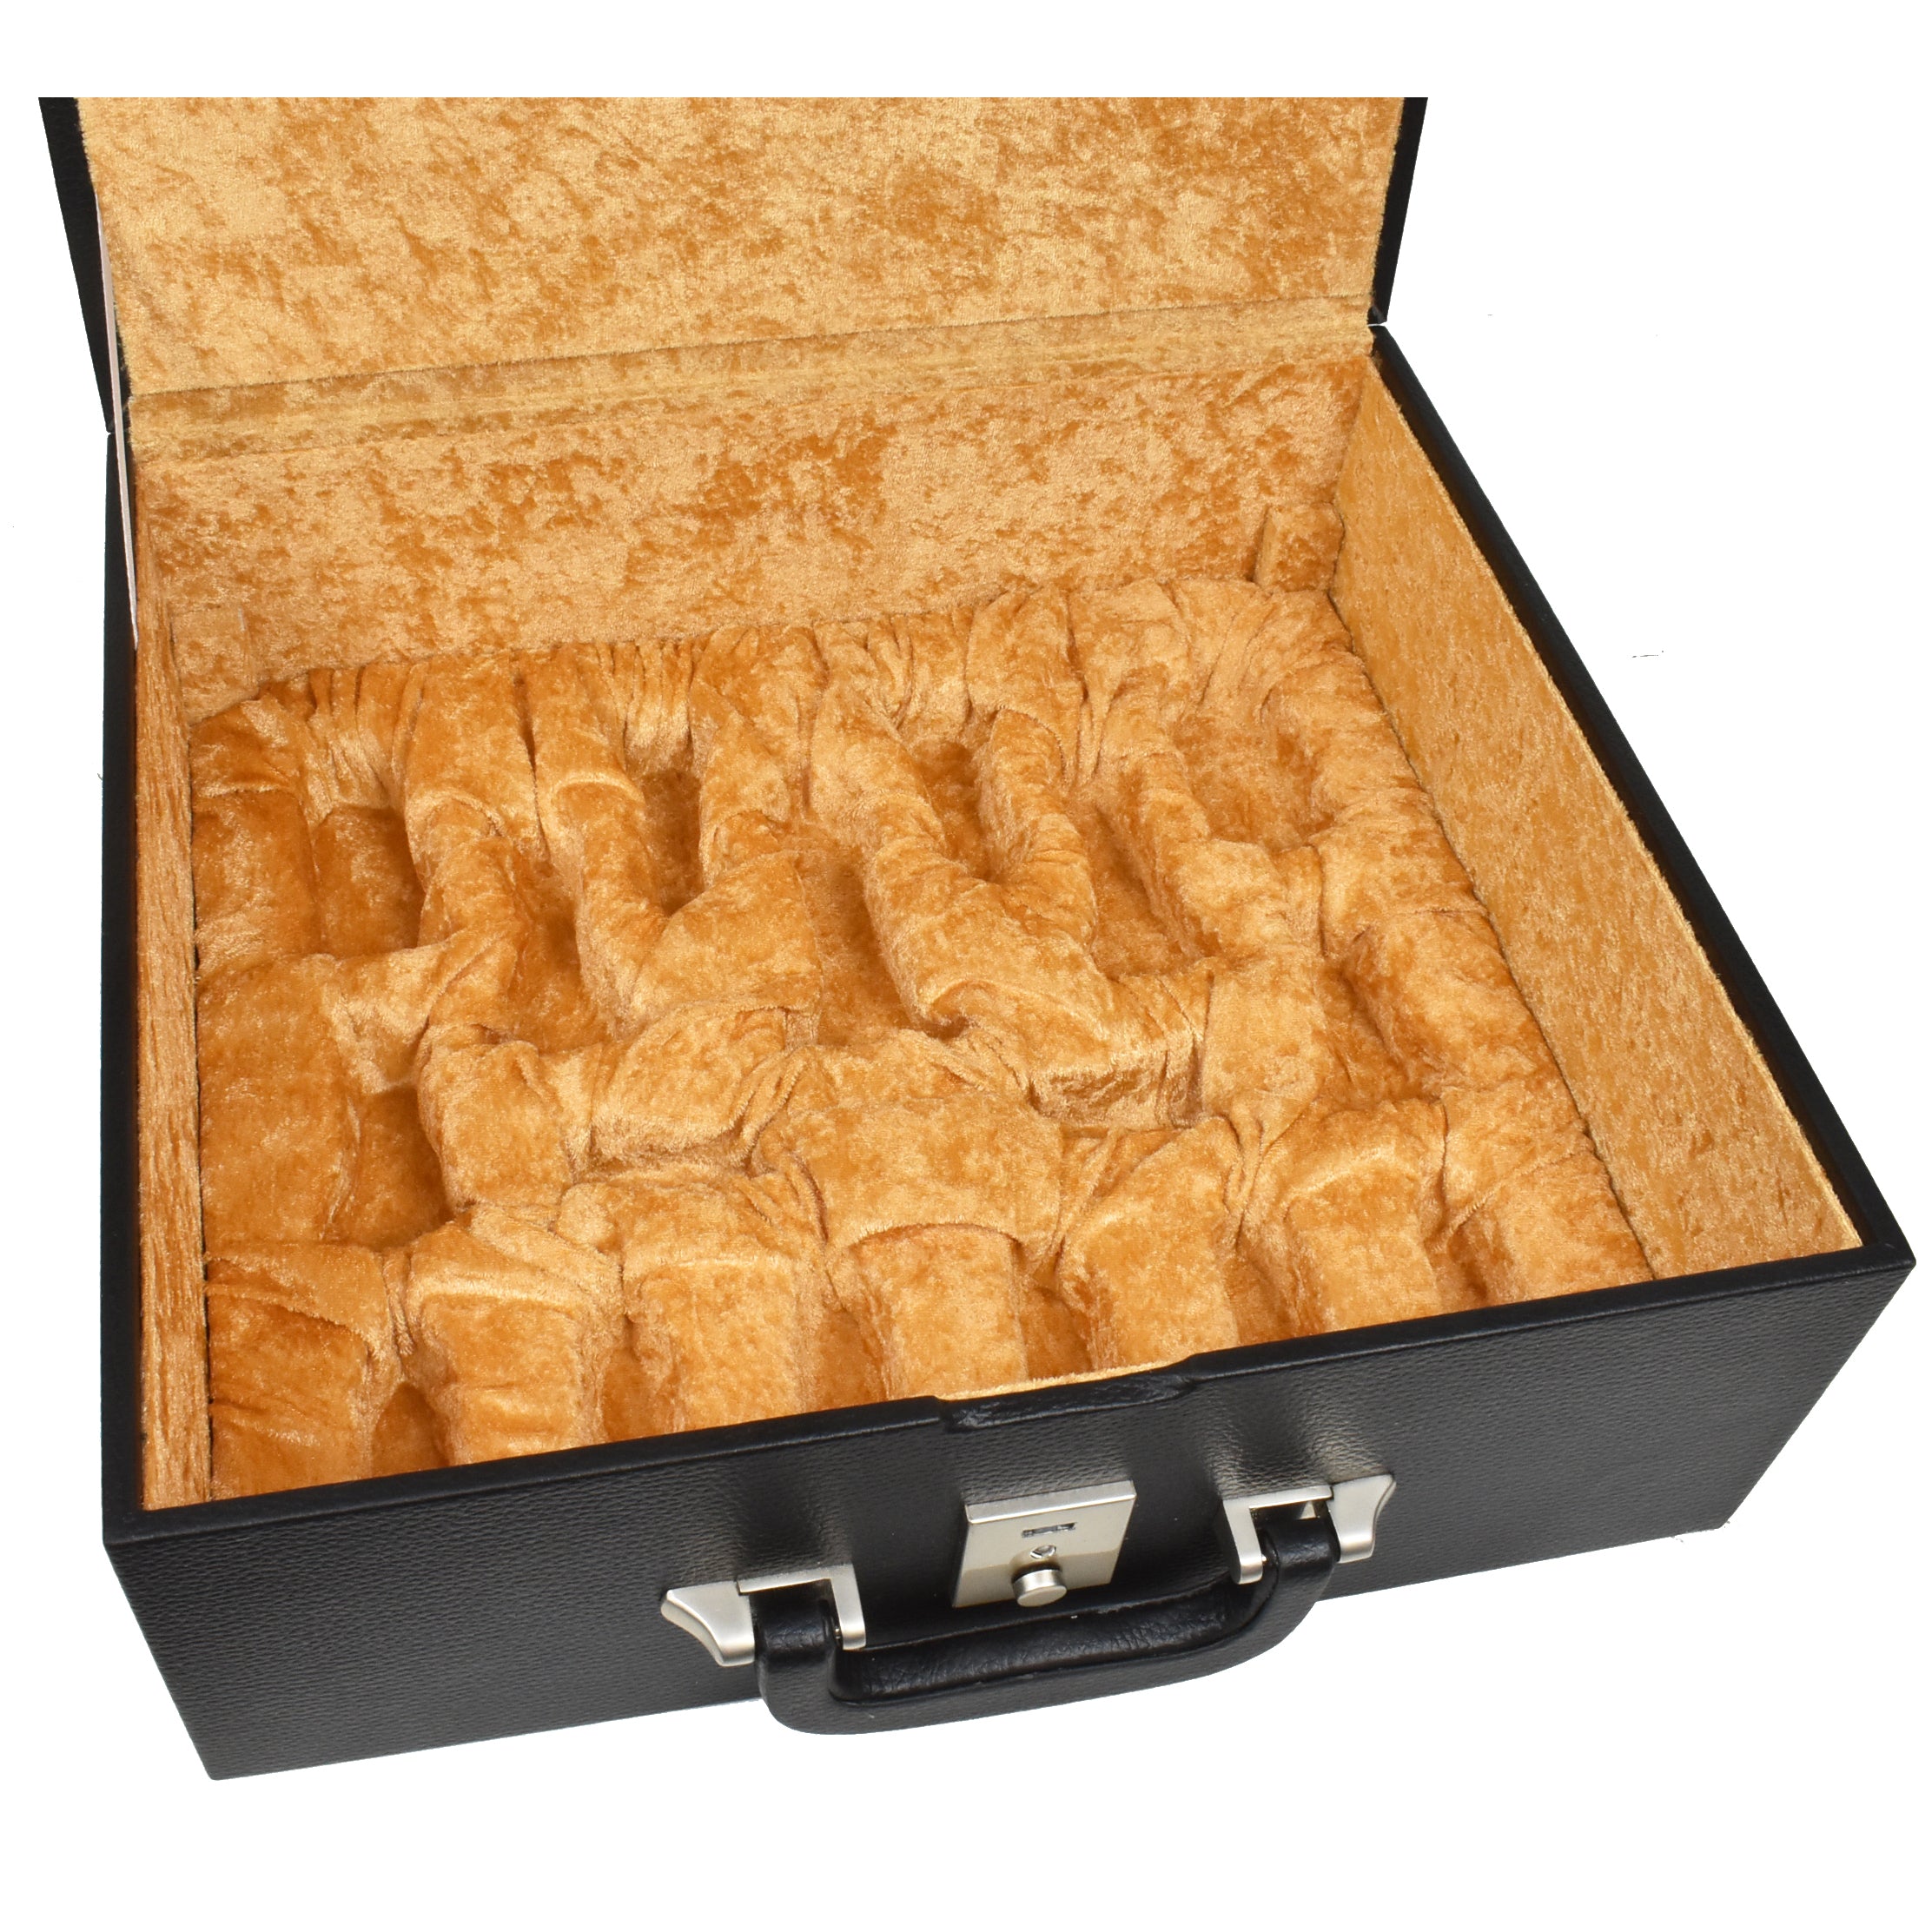 Combo of Napoleon Luxury Staunton Triple Weighted Chess Set - Pieces in Ebony Wood with 23" Large Ebony & Maple Wood Chessboard and Storage Box